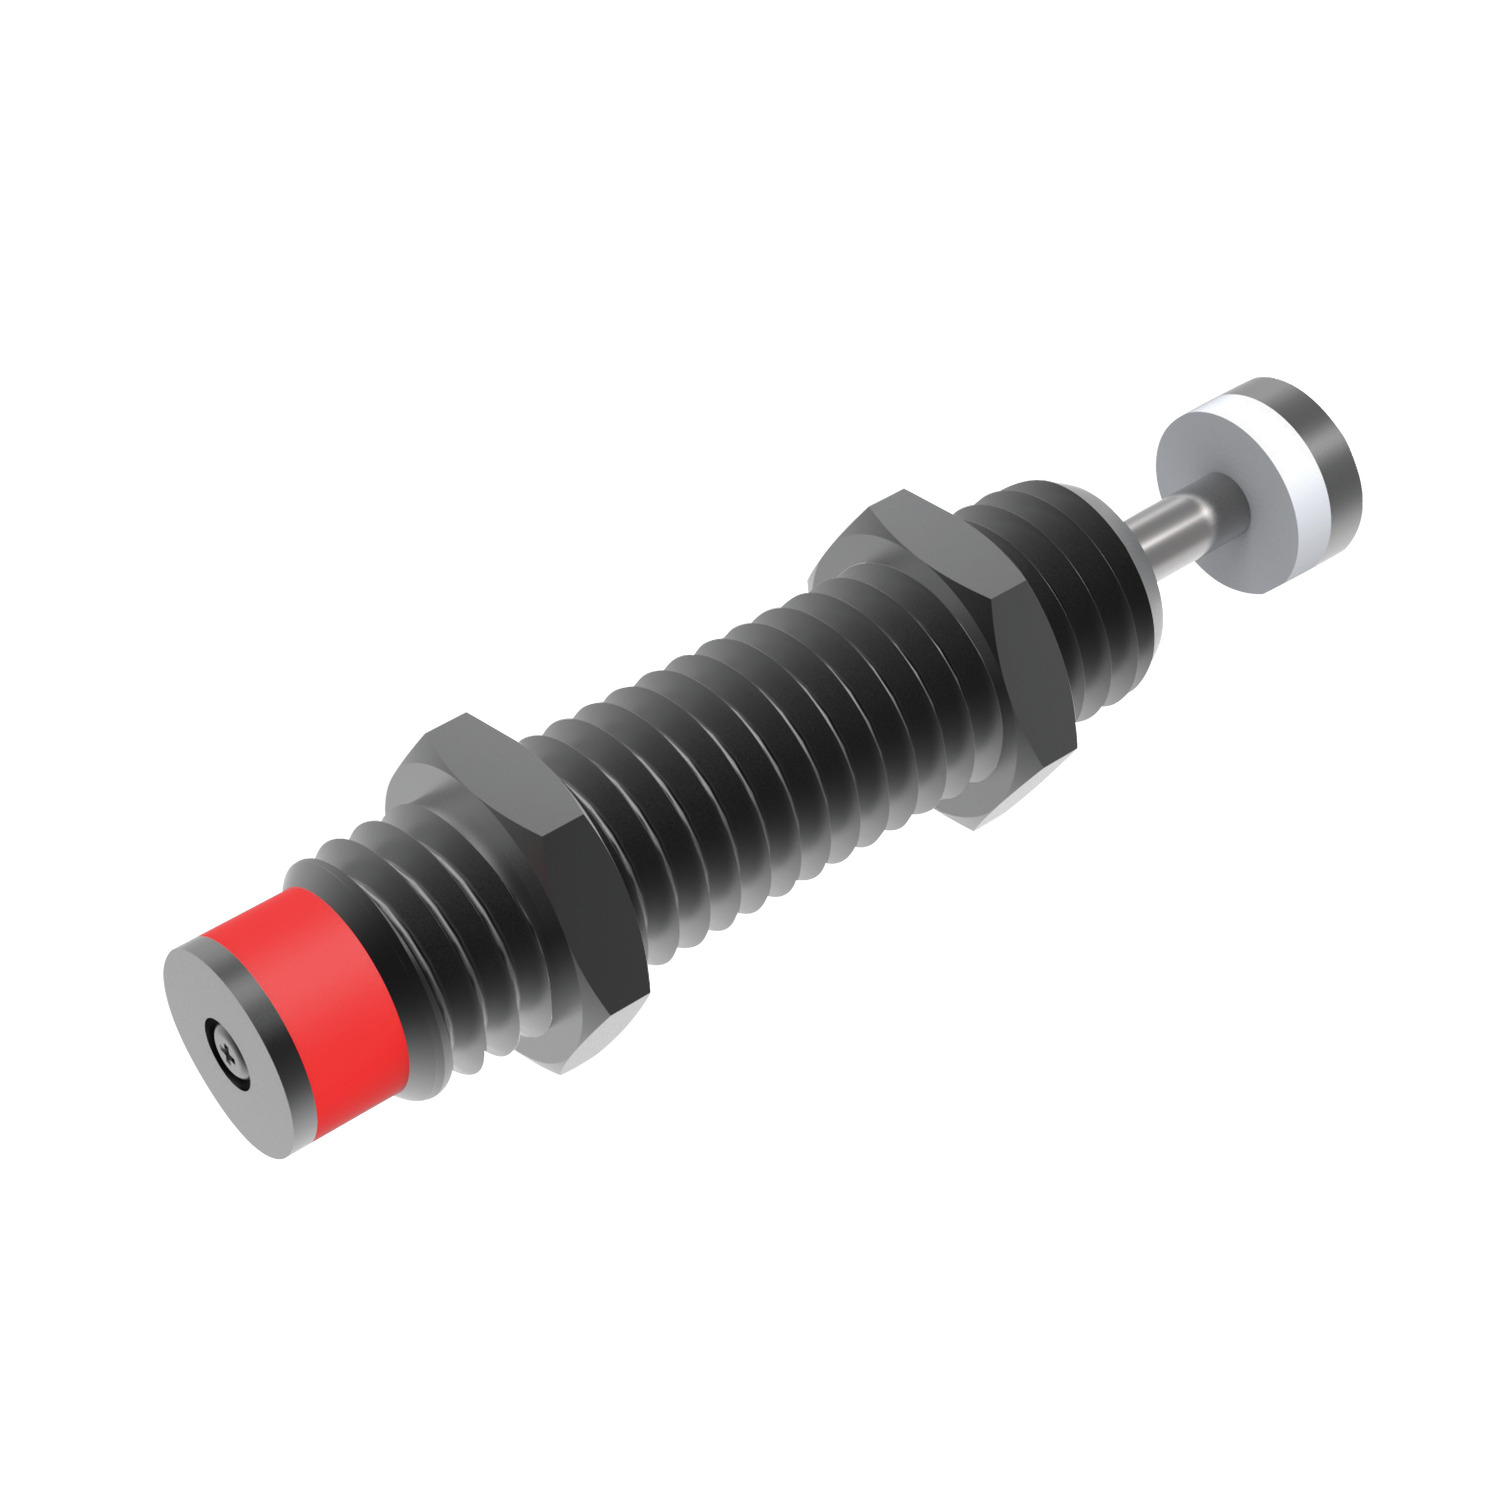 Product 68005, Shock Absorber Self Compensating M30, non-adustable / 